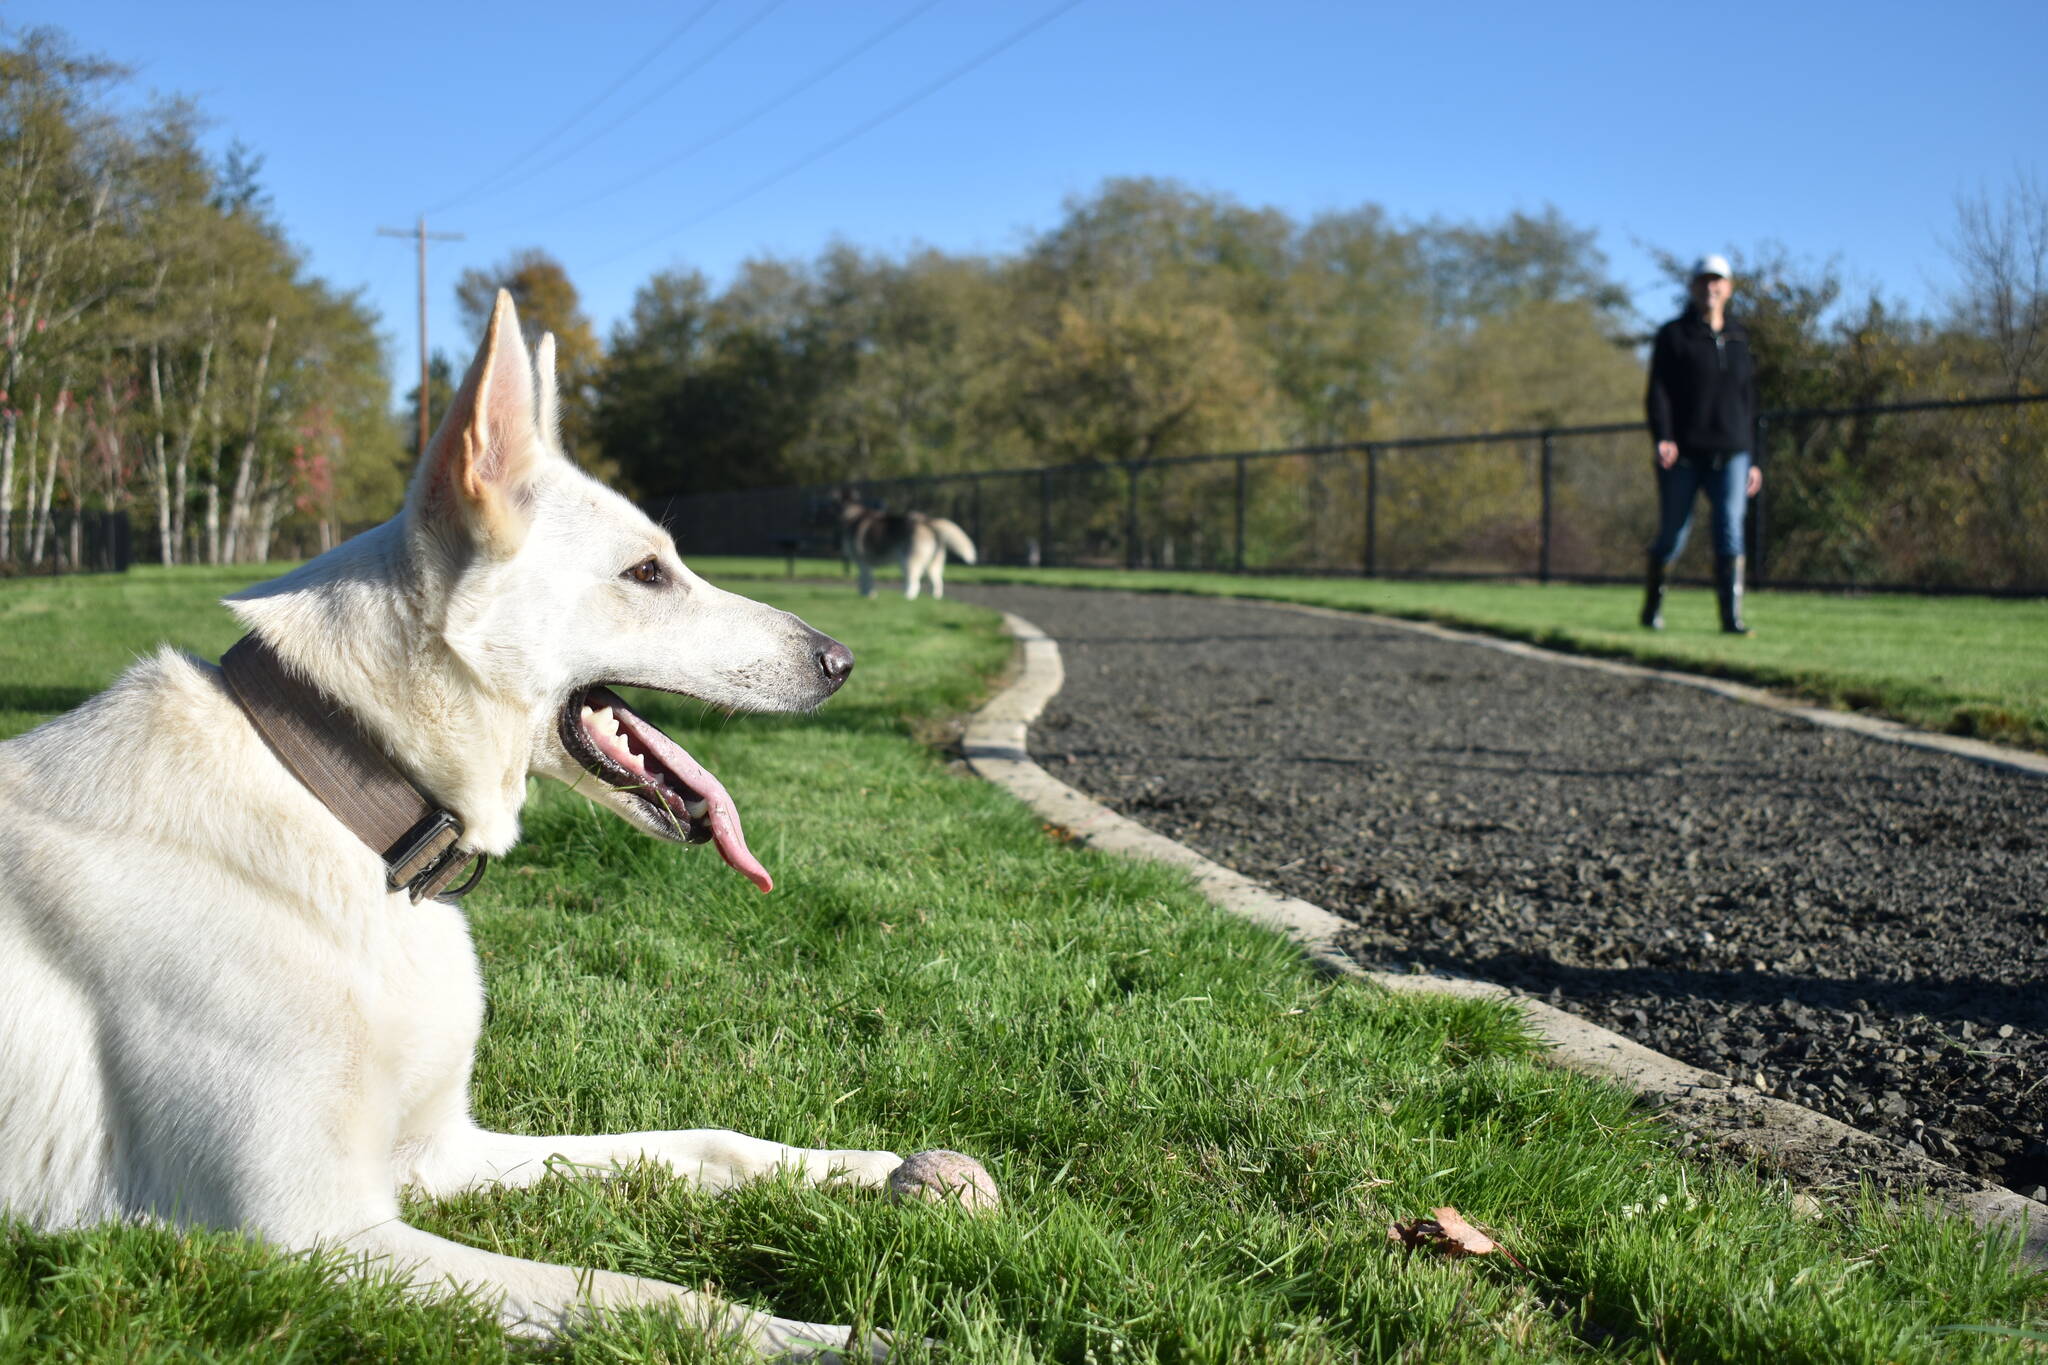 Clayton Franke / The Daily World
Aspen, a white german shepherd, rests in the sun after chasing a Frisbee inside the new Vance Creek Dog Park on Oct. 27.